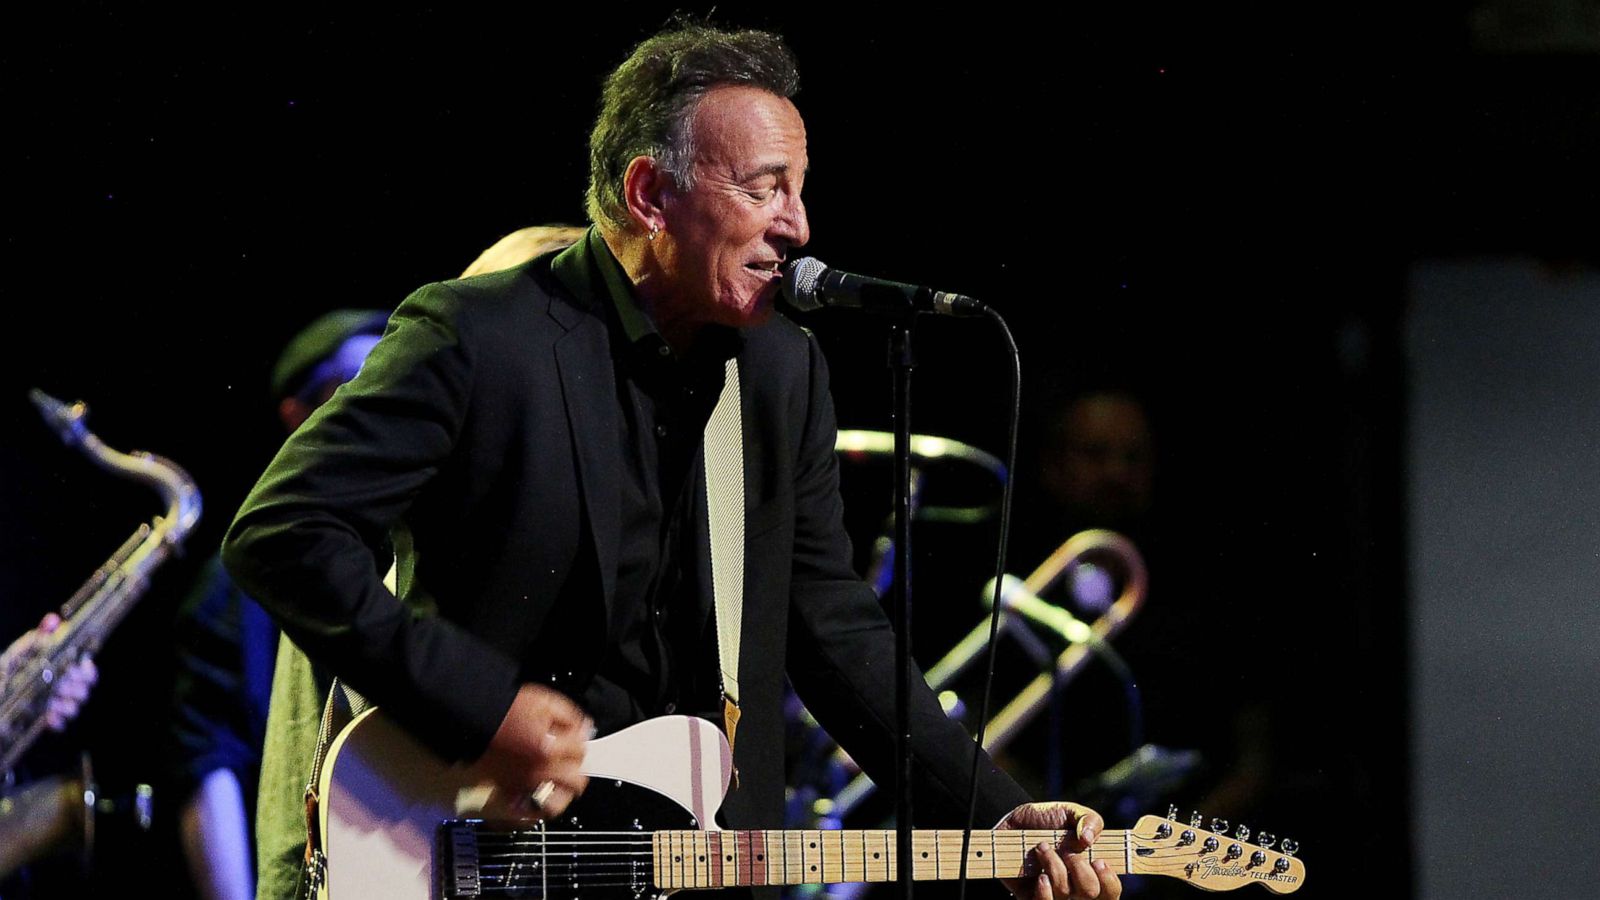 PHOTO: Bruce Springsteen playing guitar at New Line Cinemas 'Blinded By The Light' film premiere After Party in New Jersey, Aug. 7, 2019.